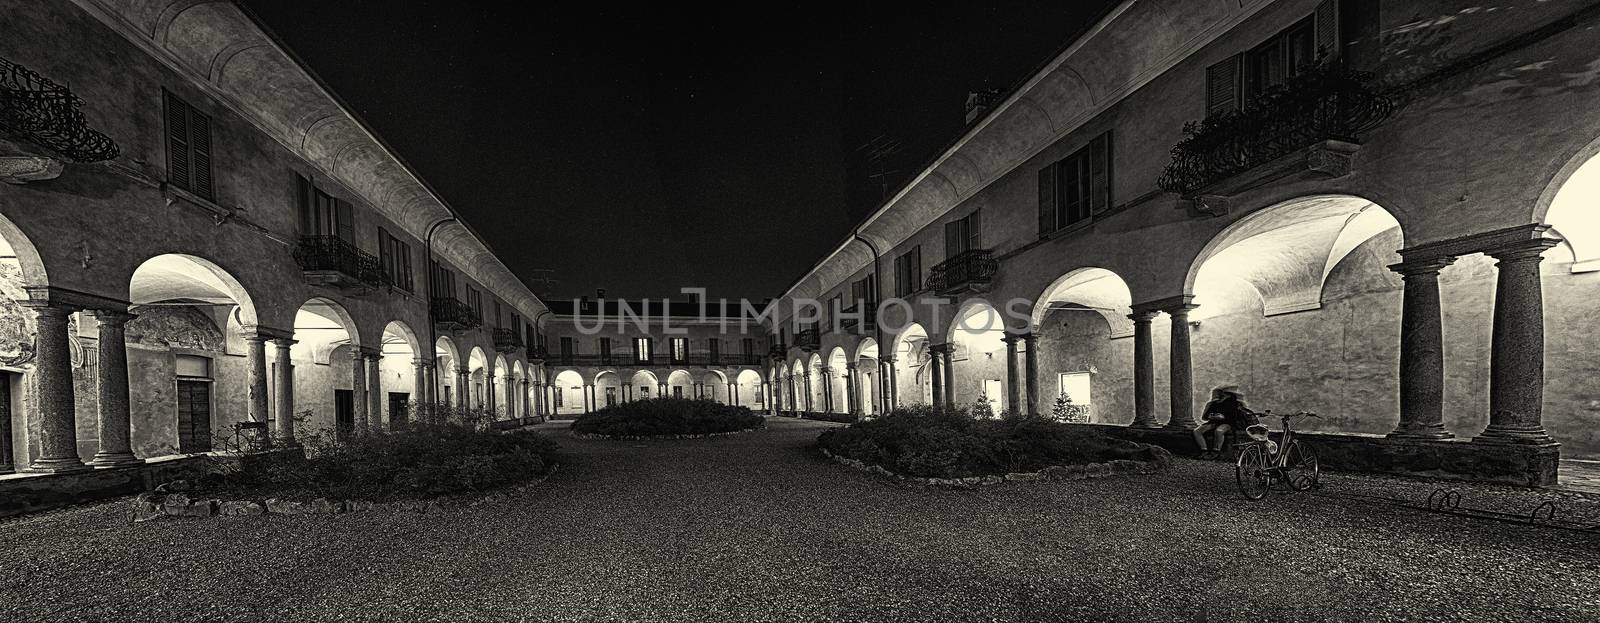 Ancient courtyard in Varese by Mdc1970